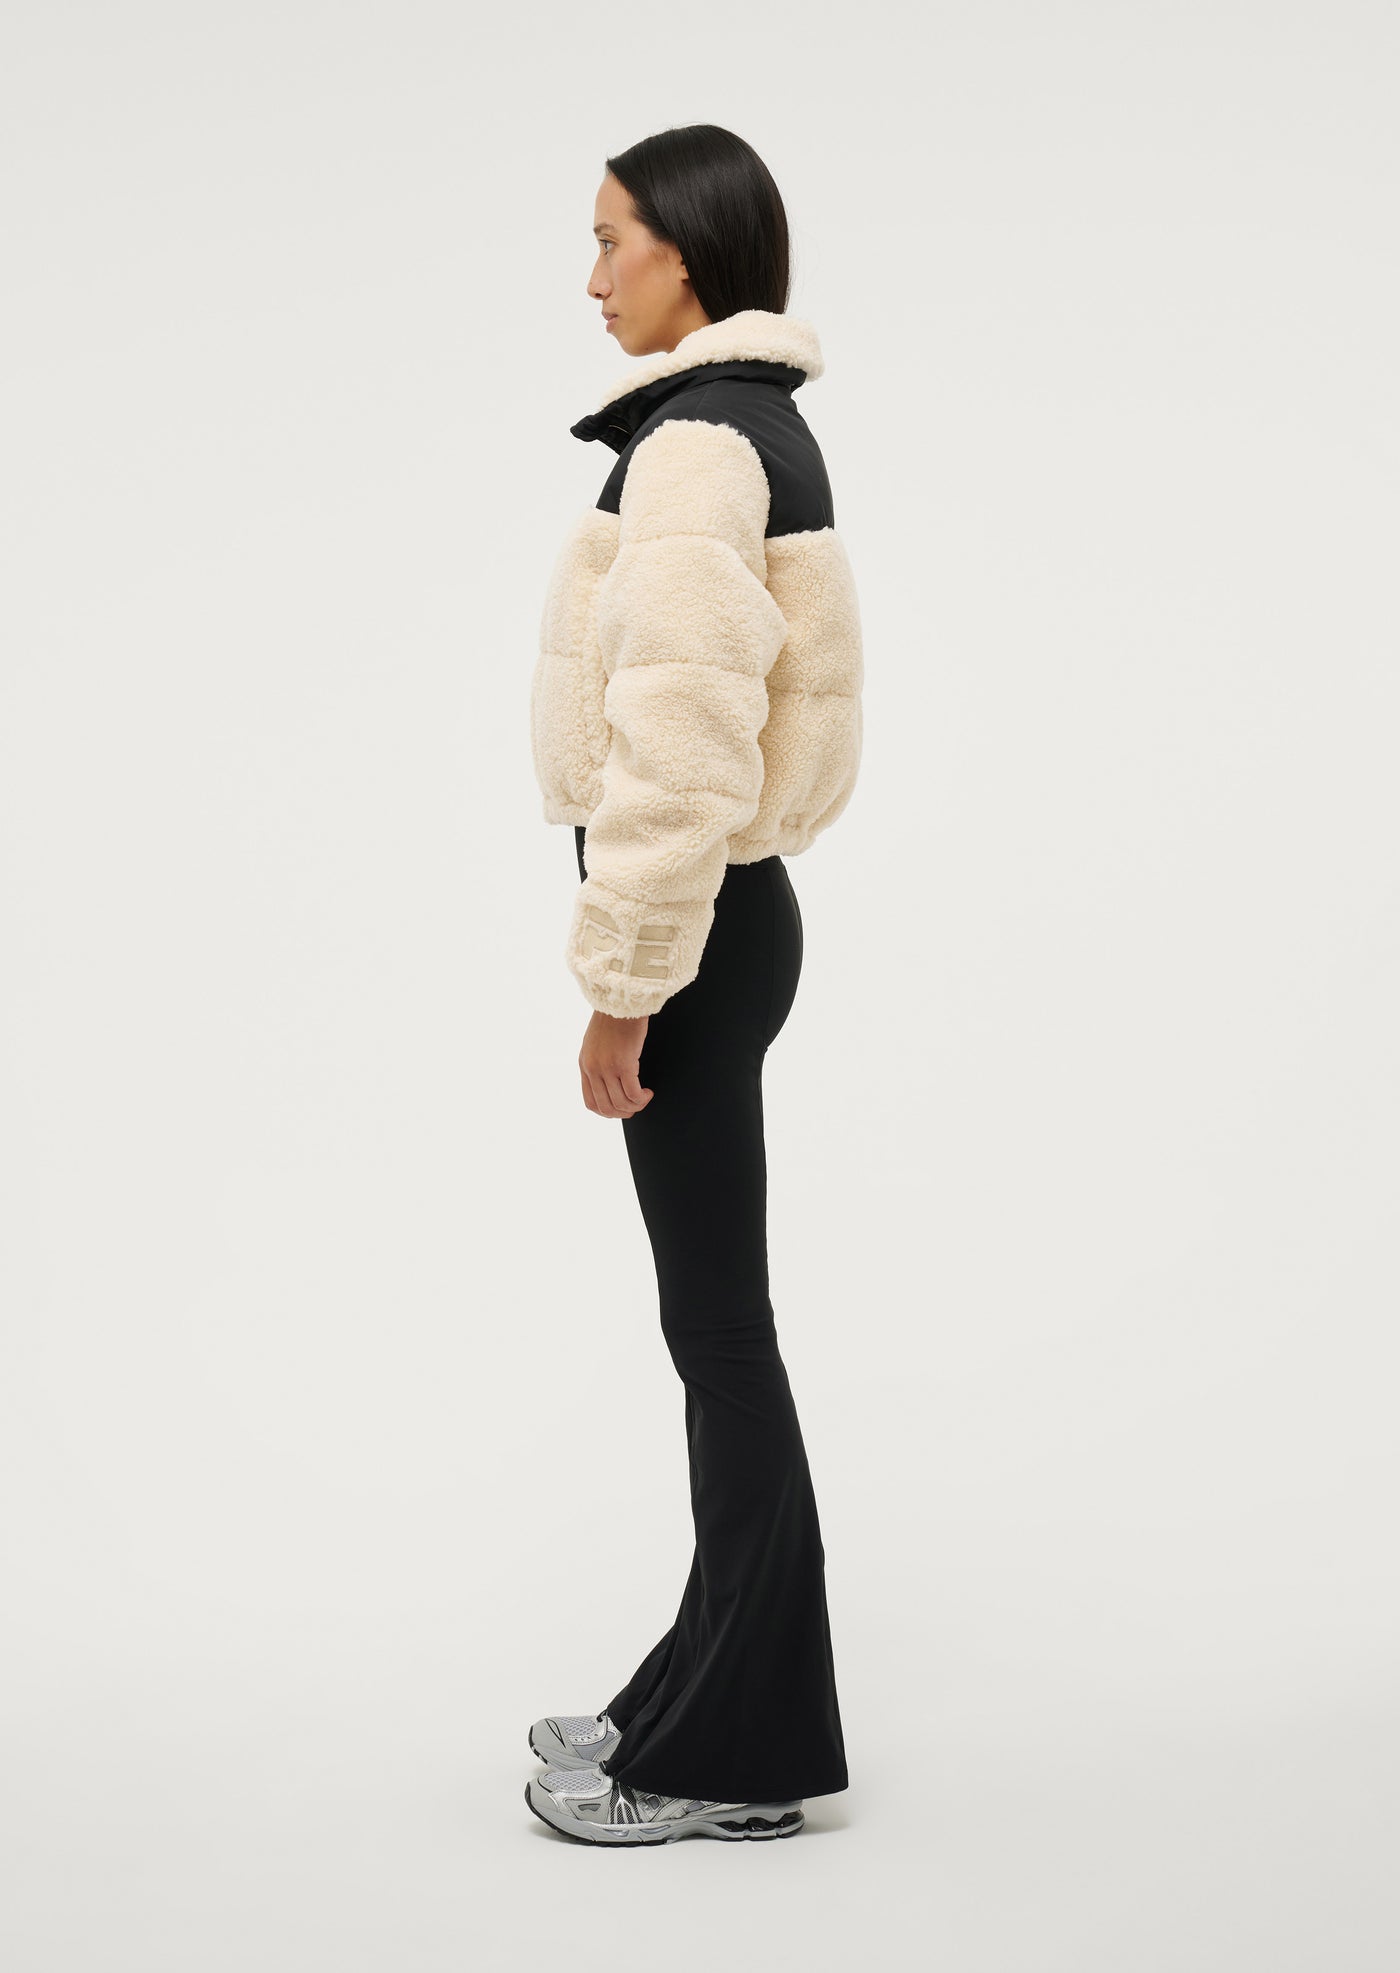 ALL STAR JACKET IN PEARLED IVORY